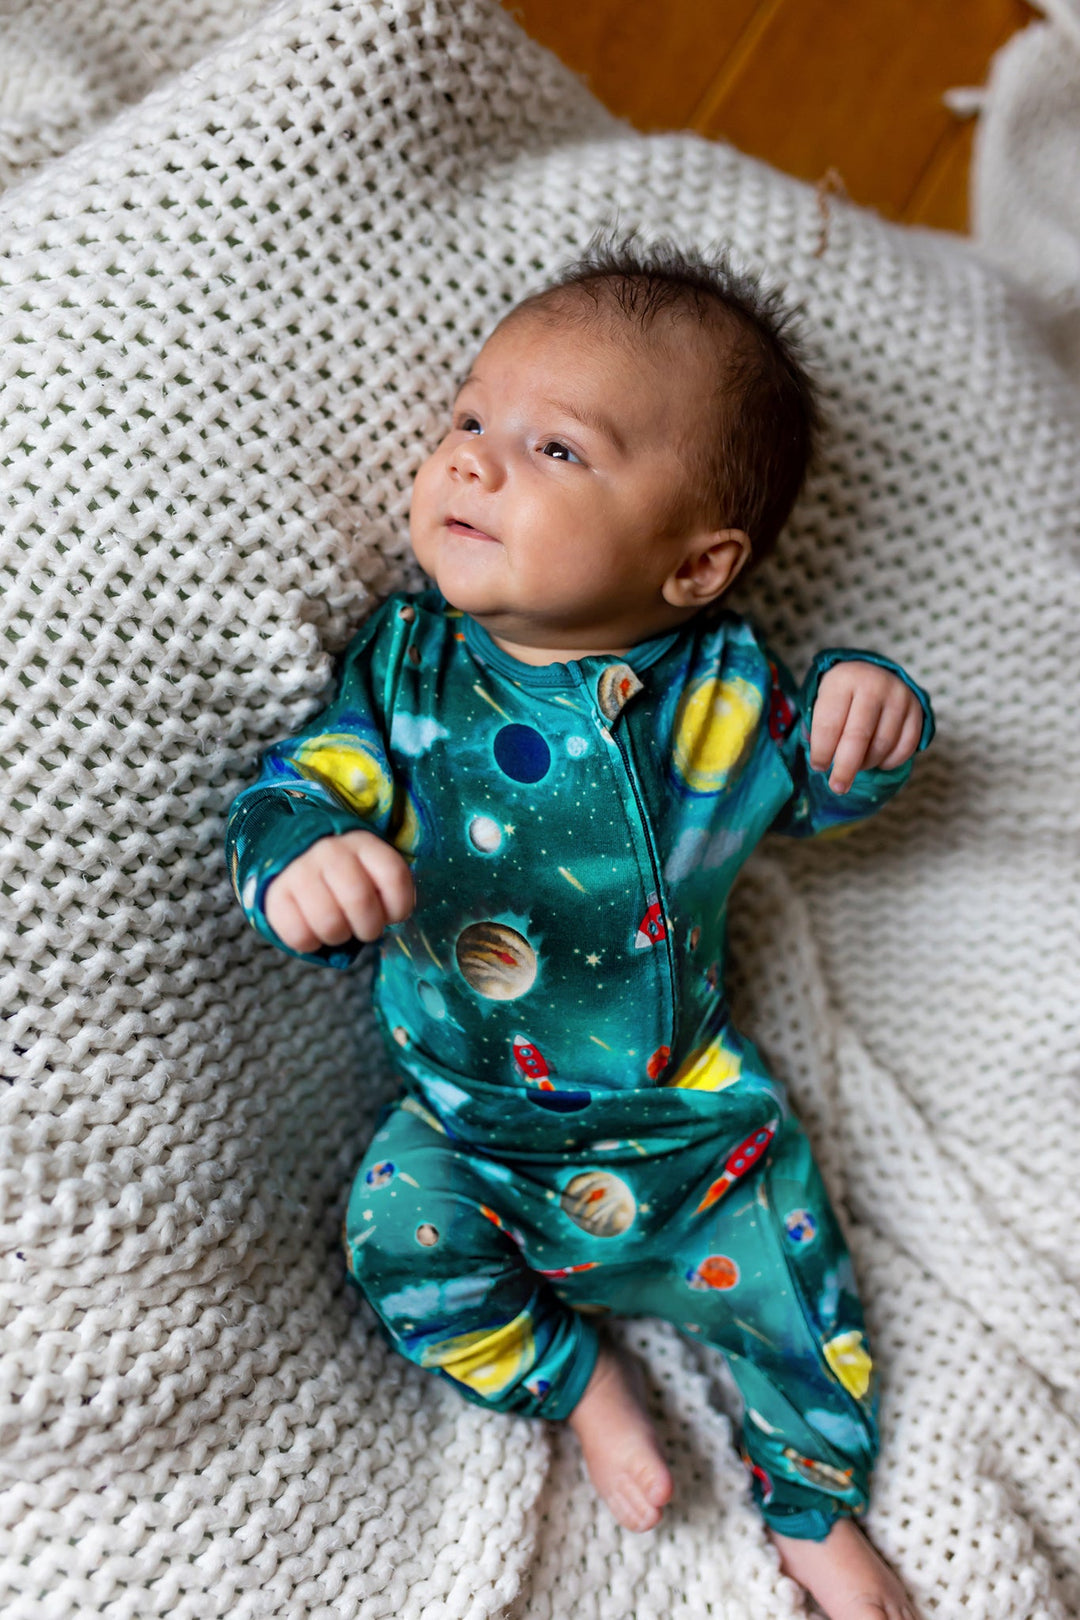 Vroom to the Planets Coverall (0-24m)